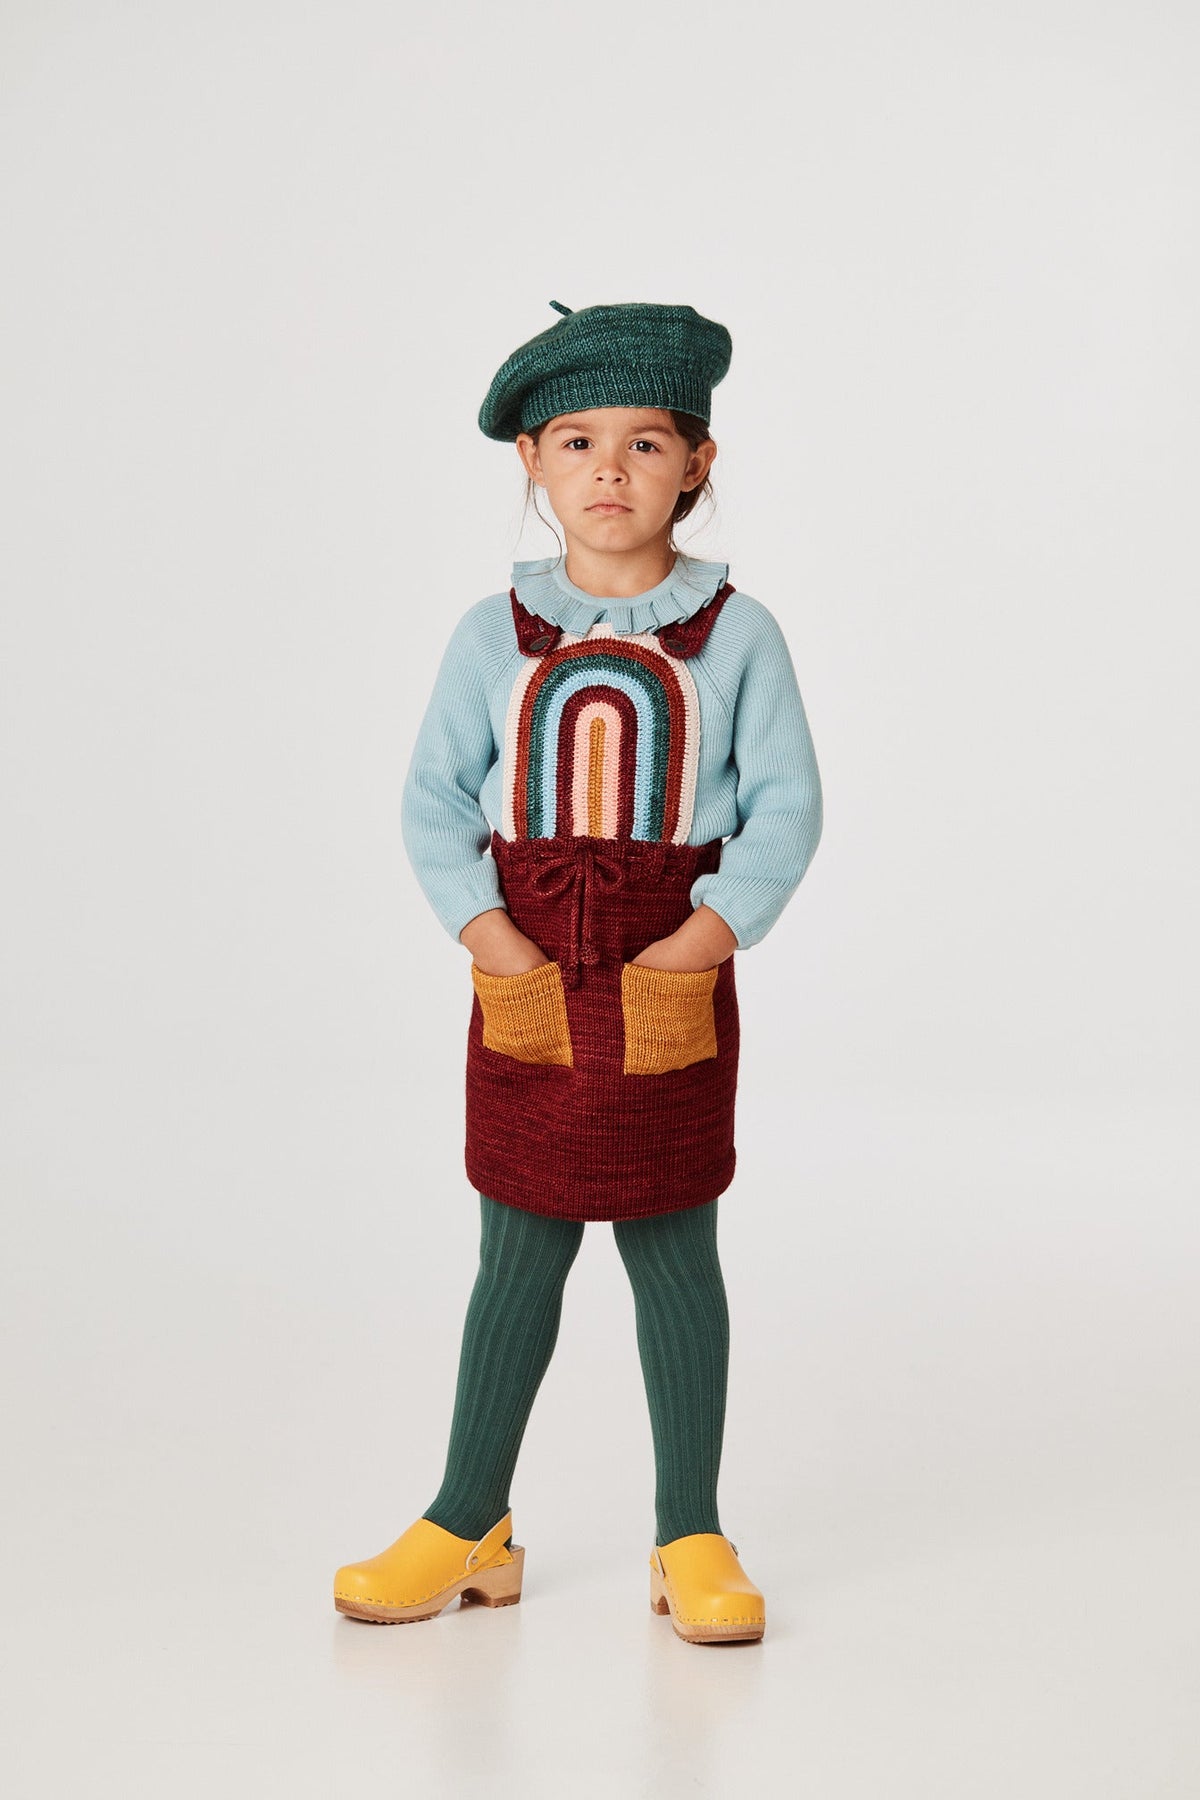 Rainbow Pinafore - Cranberry+Model is 42 inches tall, 40lbs, wearing a size 3-4y